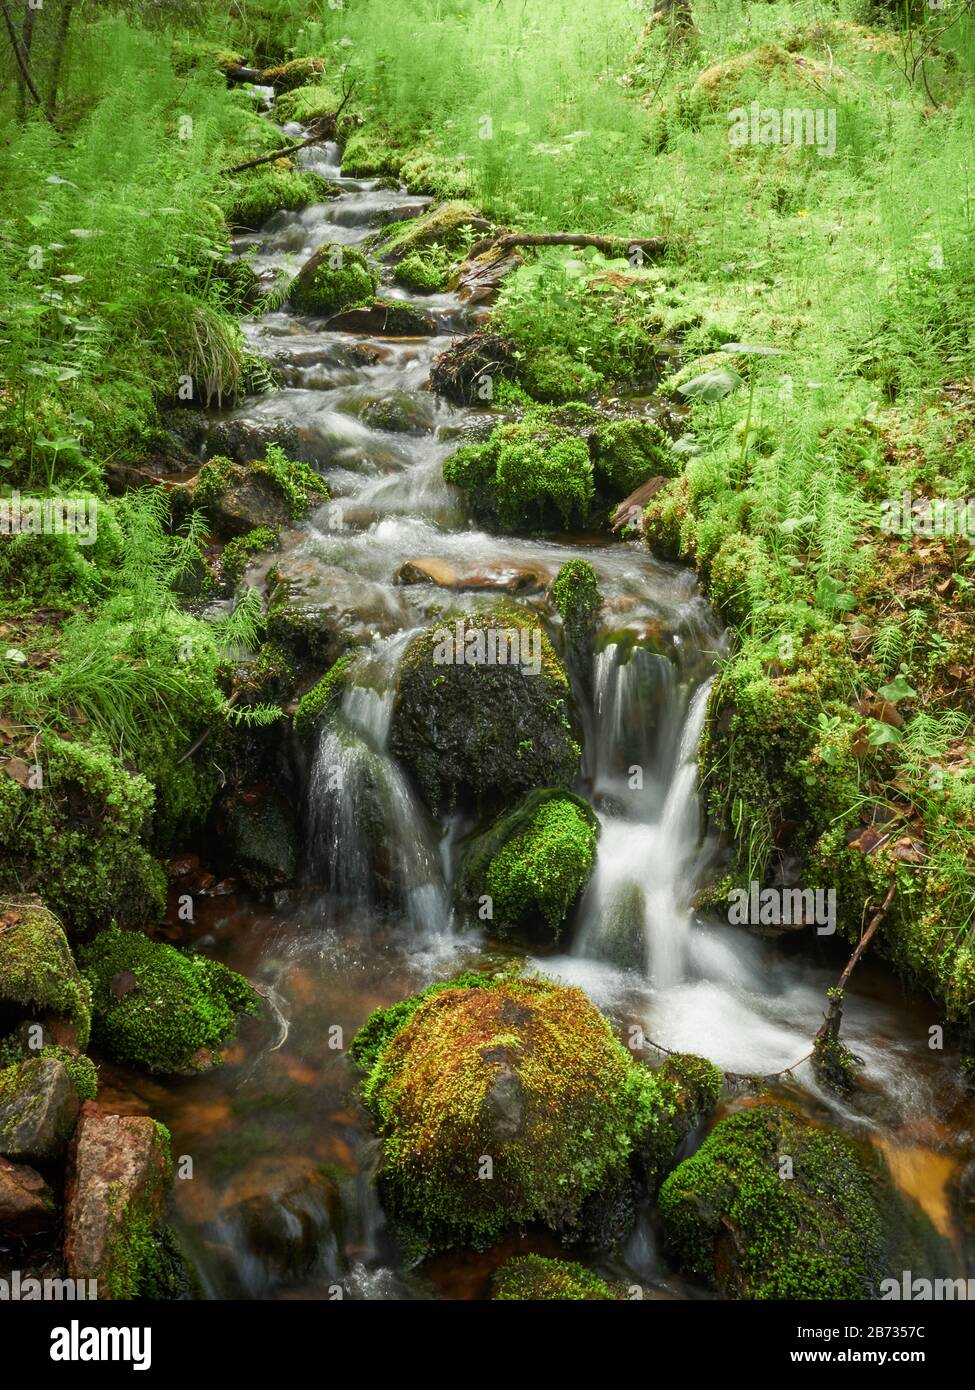 Flowing water in small creek closeup in Yllas, Finland Stock Photo